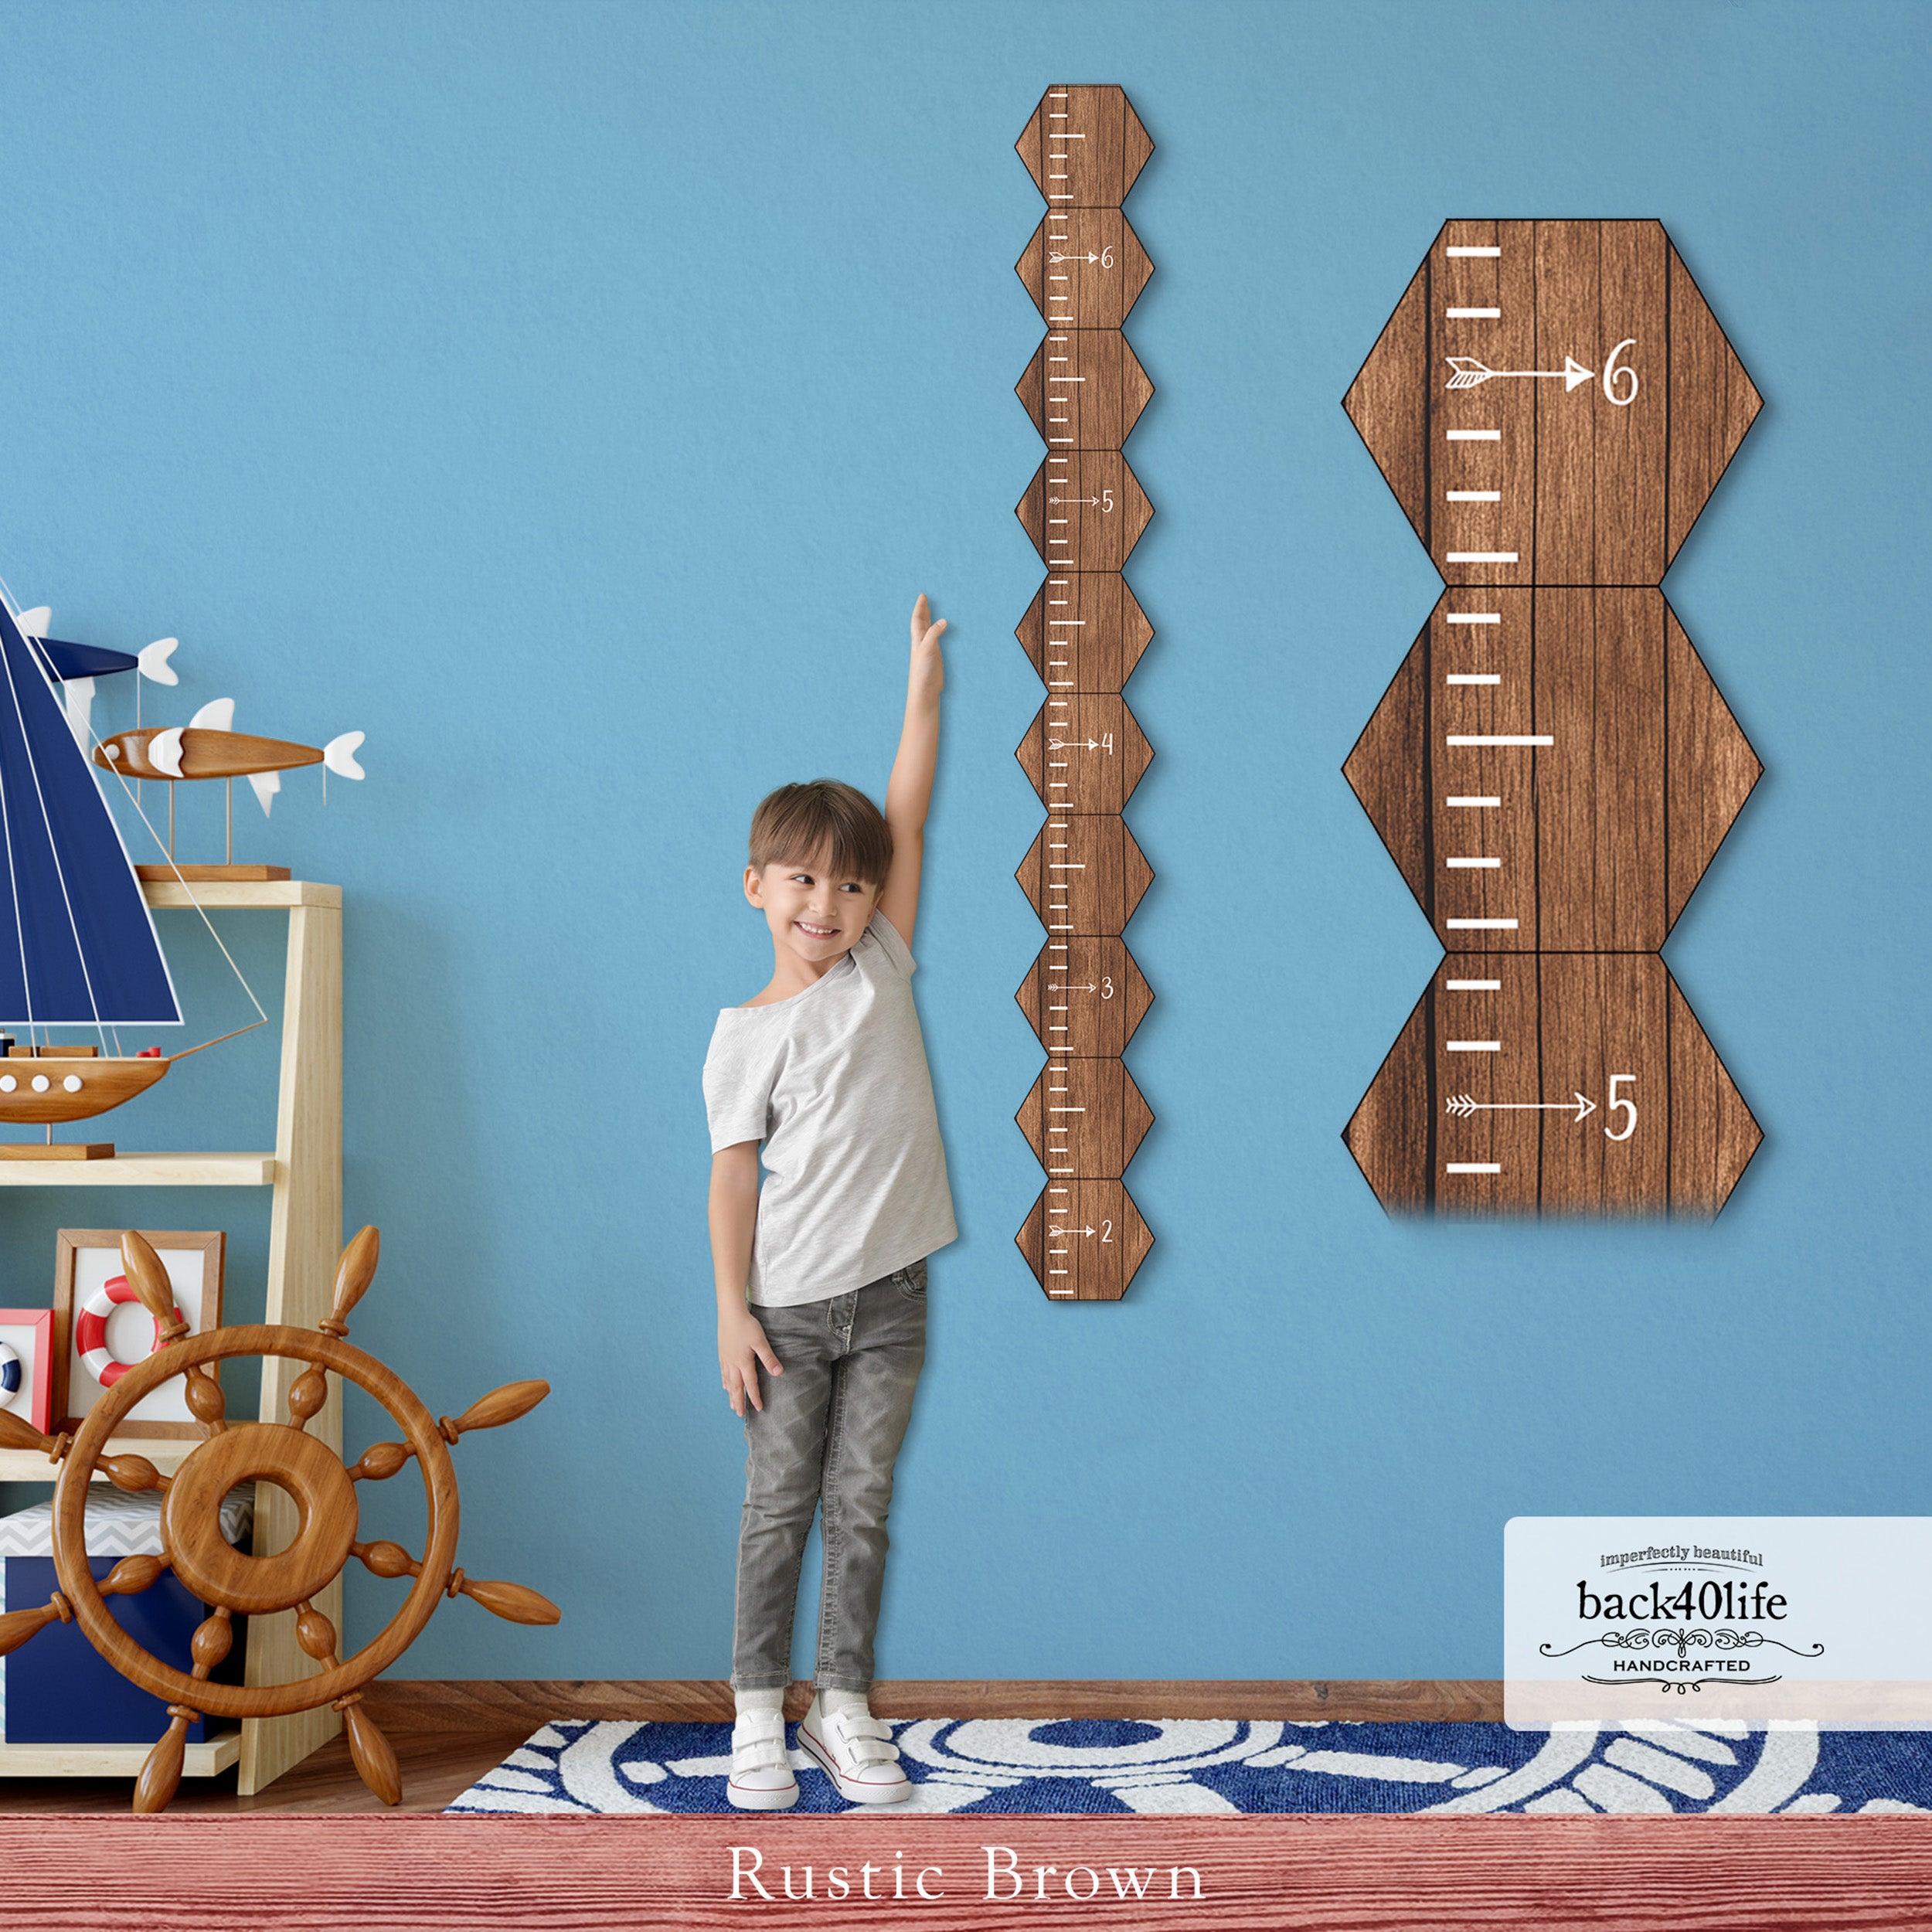 Personalized Wooden Kids Growth Chart - Height Ruler for Boys Girls Size Measuring Stick Family Name - Custom Ruler Gift Children GC-HEX-AA Hexagon